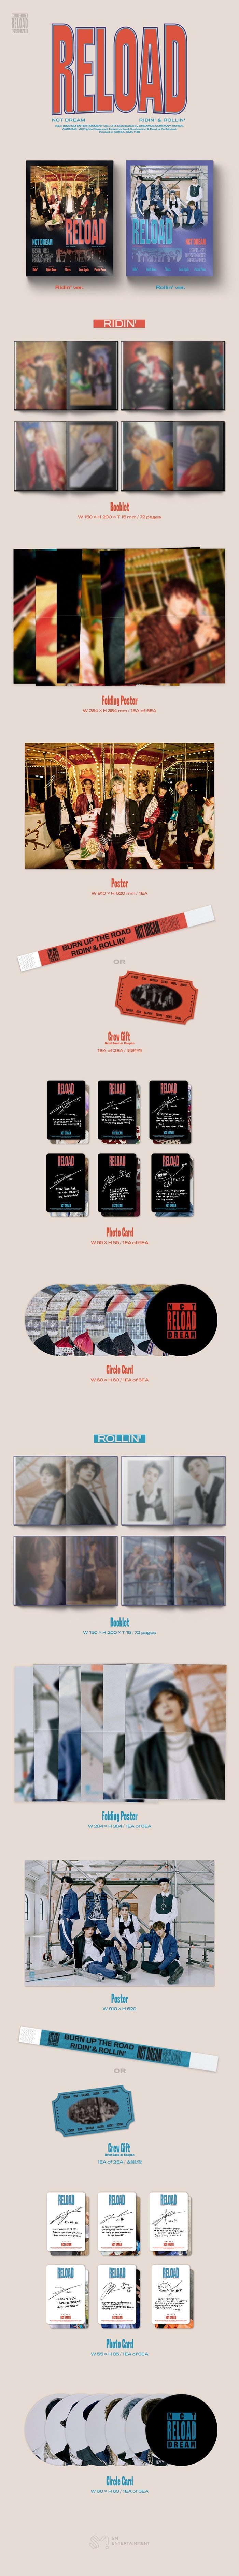 1 CD
1 Booklet (72 pages)
1 Folding Poster (random out of 6 types)
1 Photo Card (random out of 6 types)
1 Circle Card (ran...